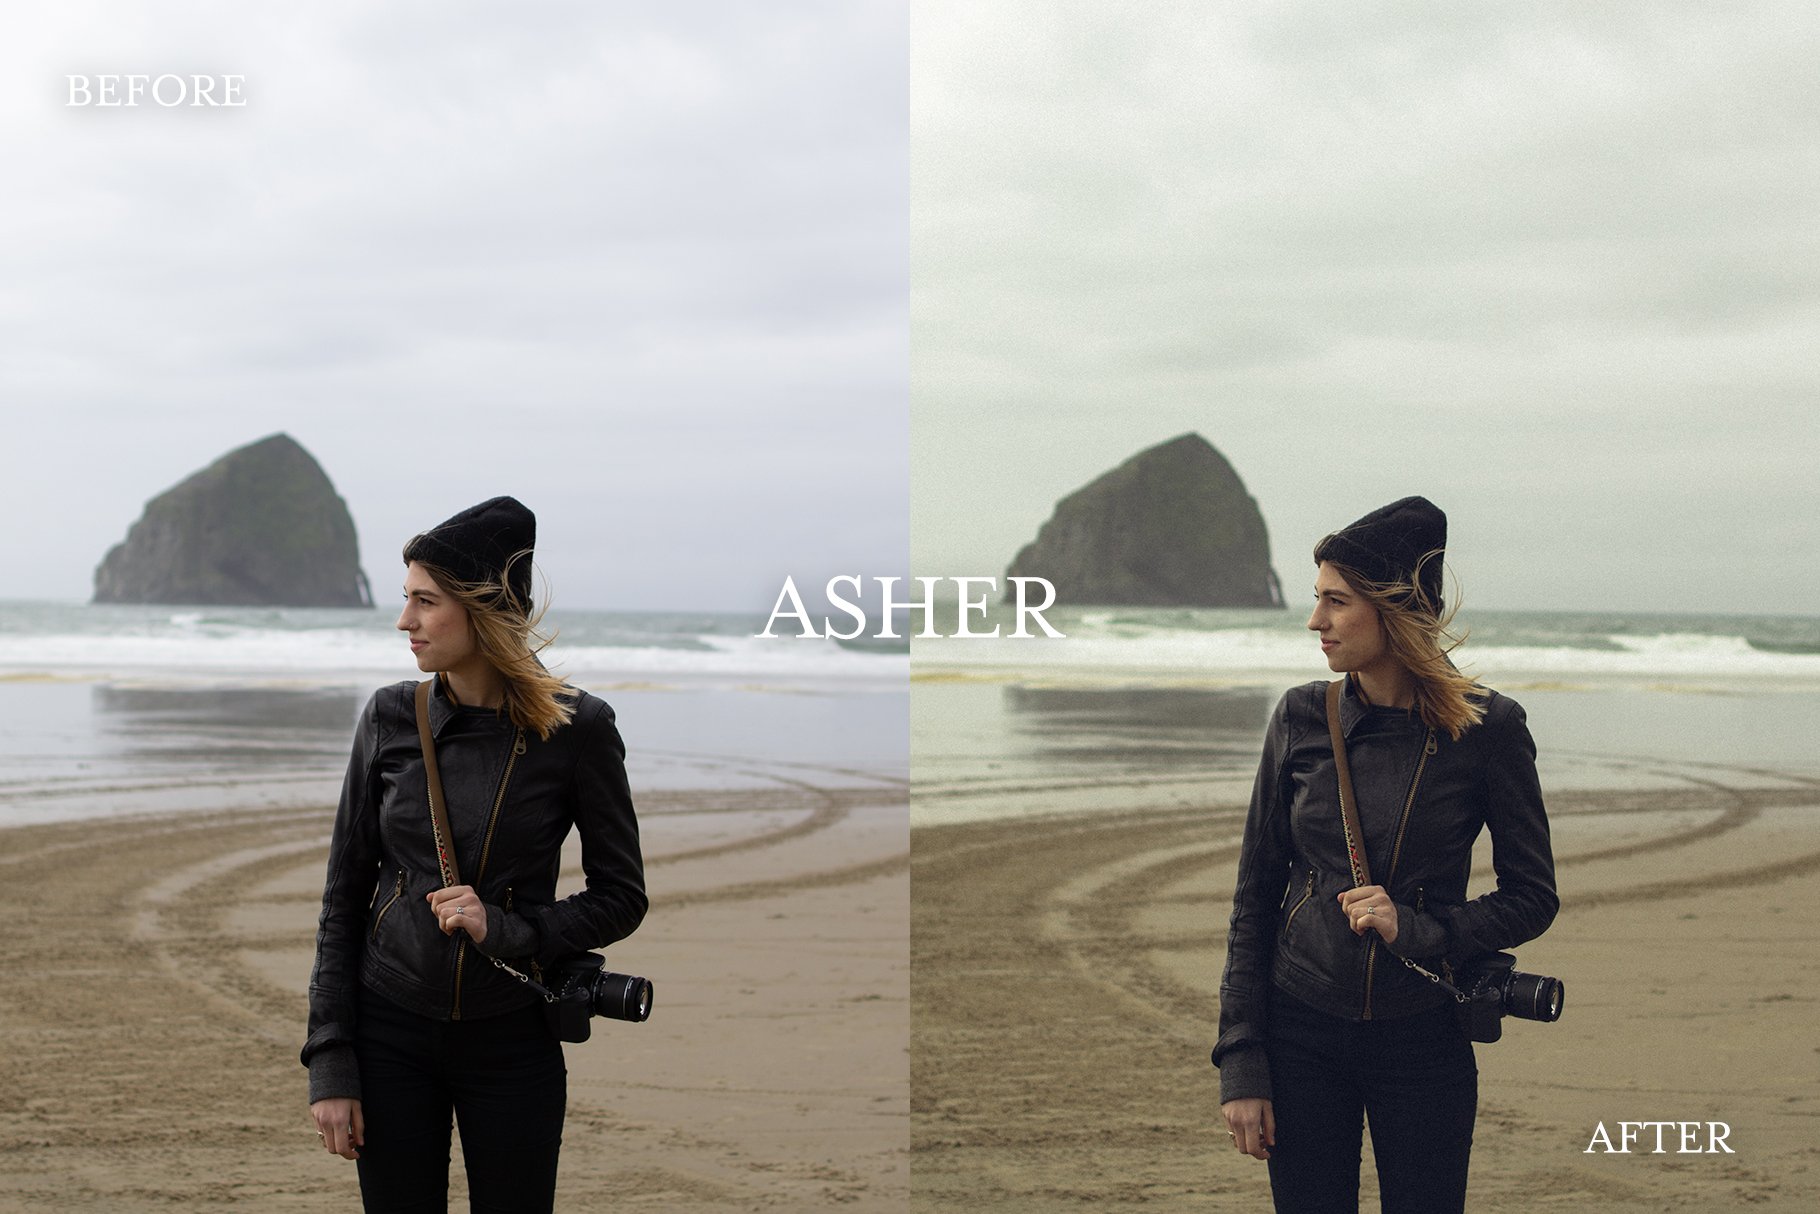 The Travel Collection – Preset Packpreview image.